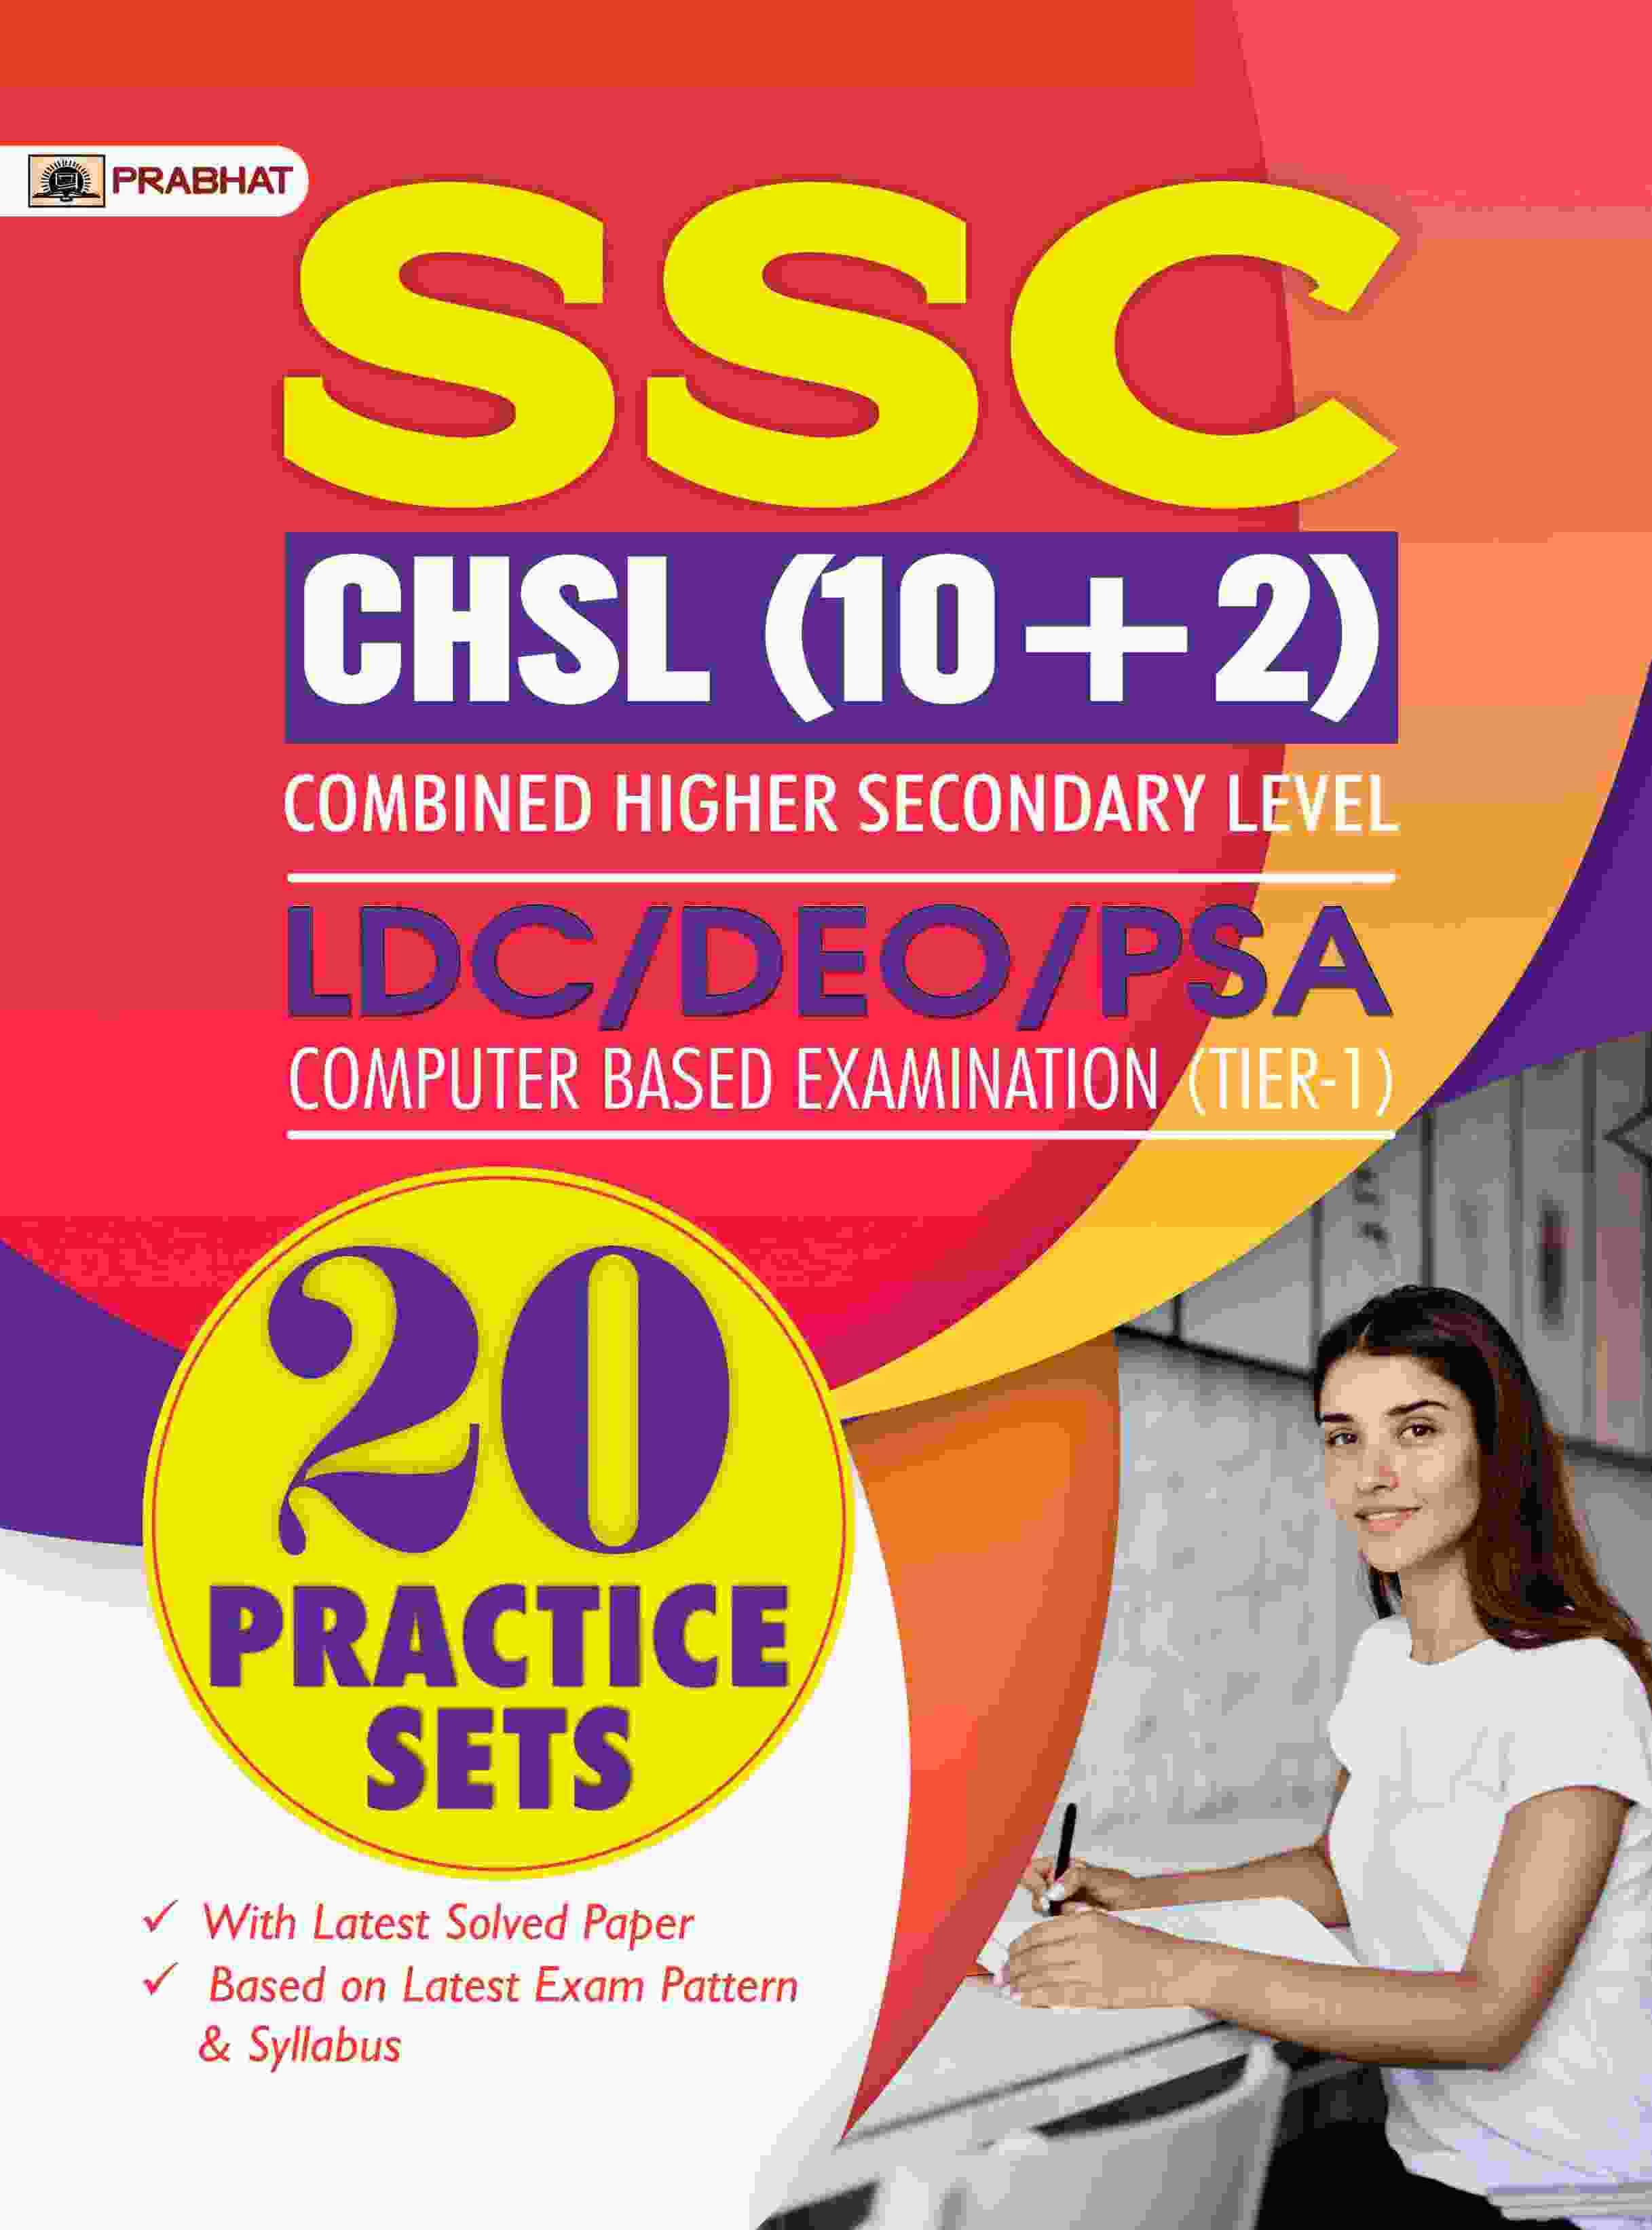 SSC CHSL (10+2) Combined Higher Secondary Level LDC/DEO/PSA Computer Based Examination (Tier-1) 20 Practice Sets in English 